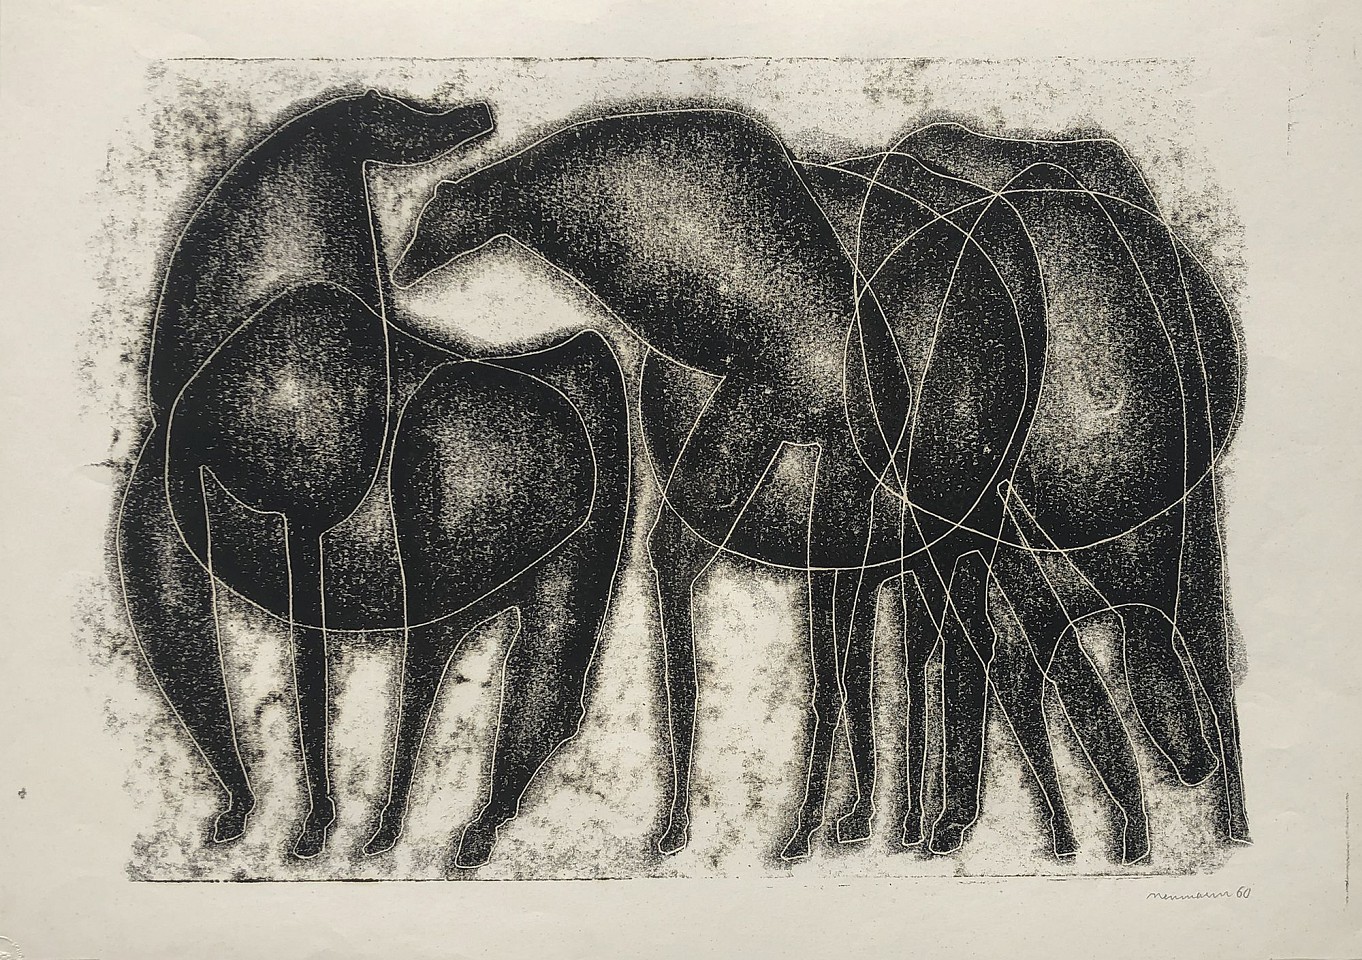 Otto Neumann 1895-1975, Abstract Horses, 1960
monotype on paper, 17.625" x 24.625",26" x 33" framed 
OT 045014
Price Upon Request